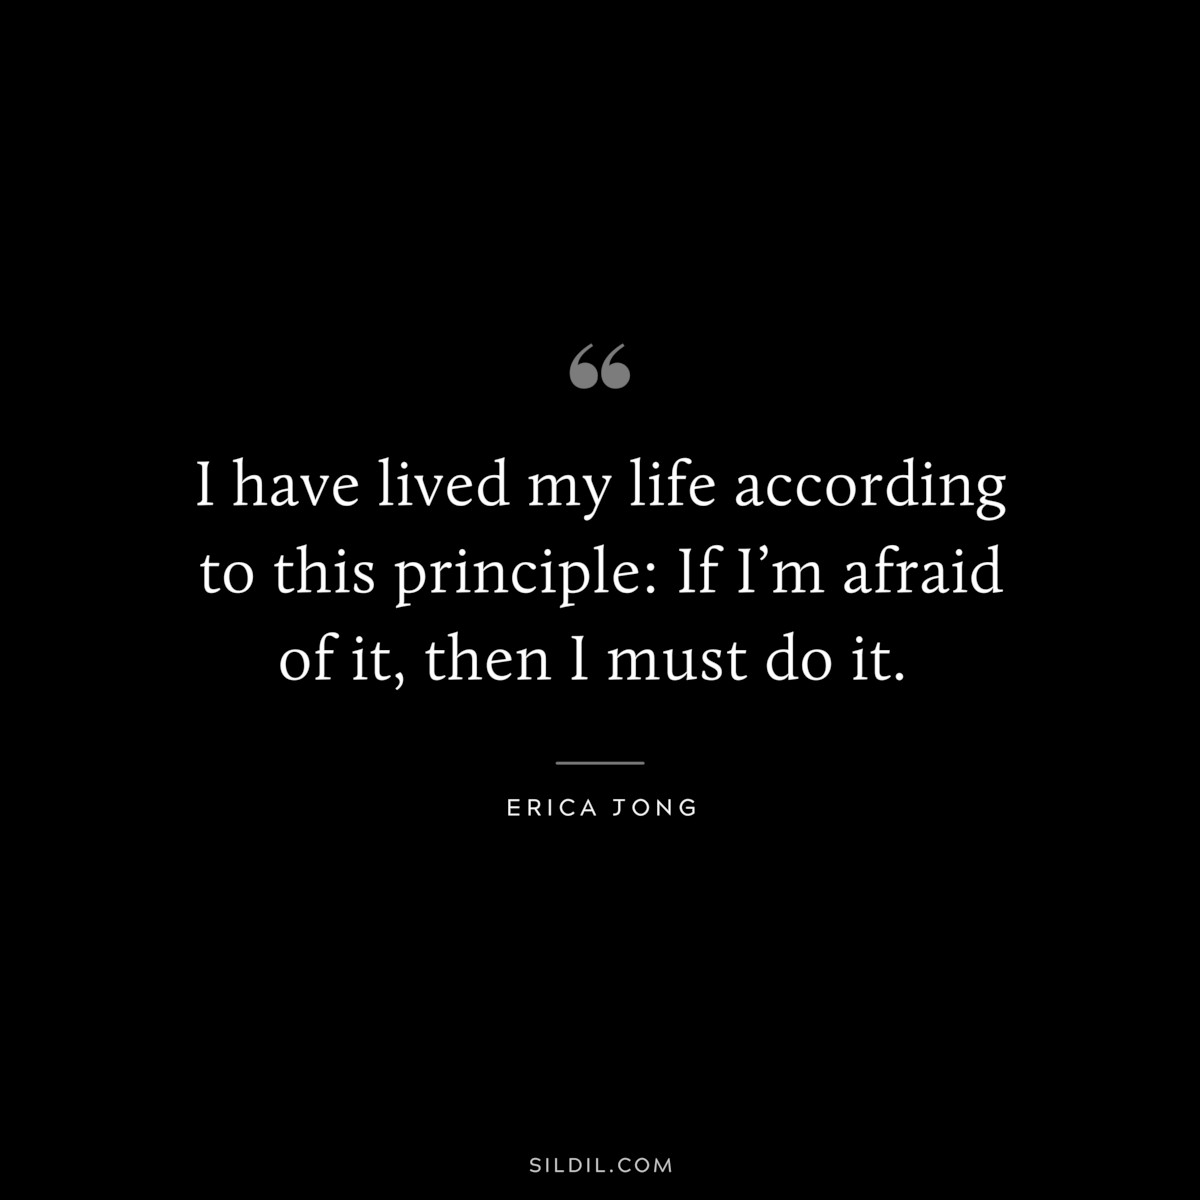 I have lived my life according to this principle: If I’m afraid of it, then I must do it. ― Erica Jong